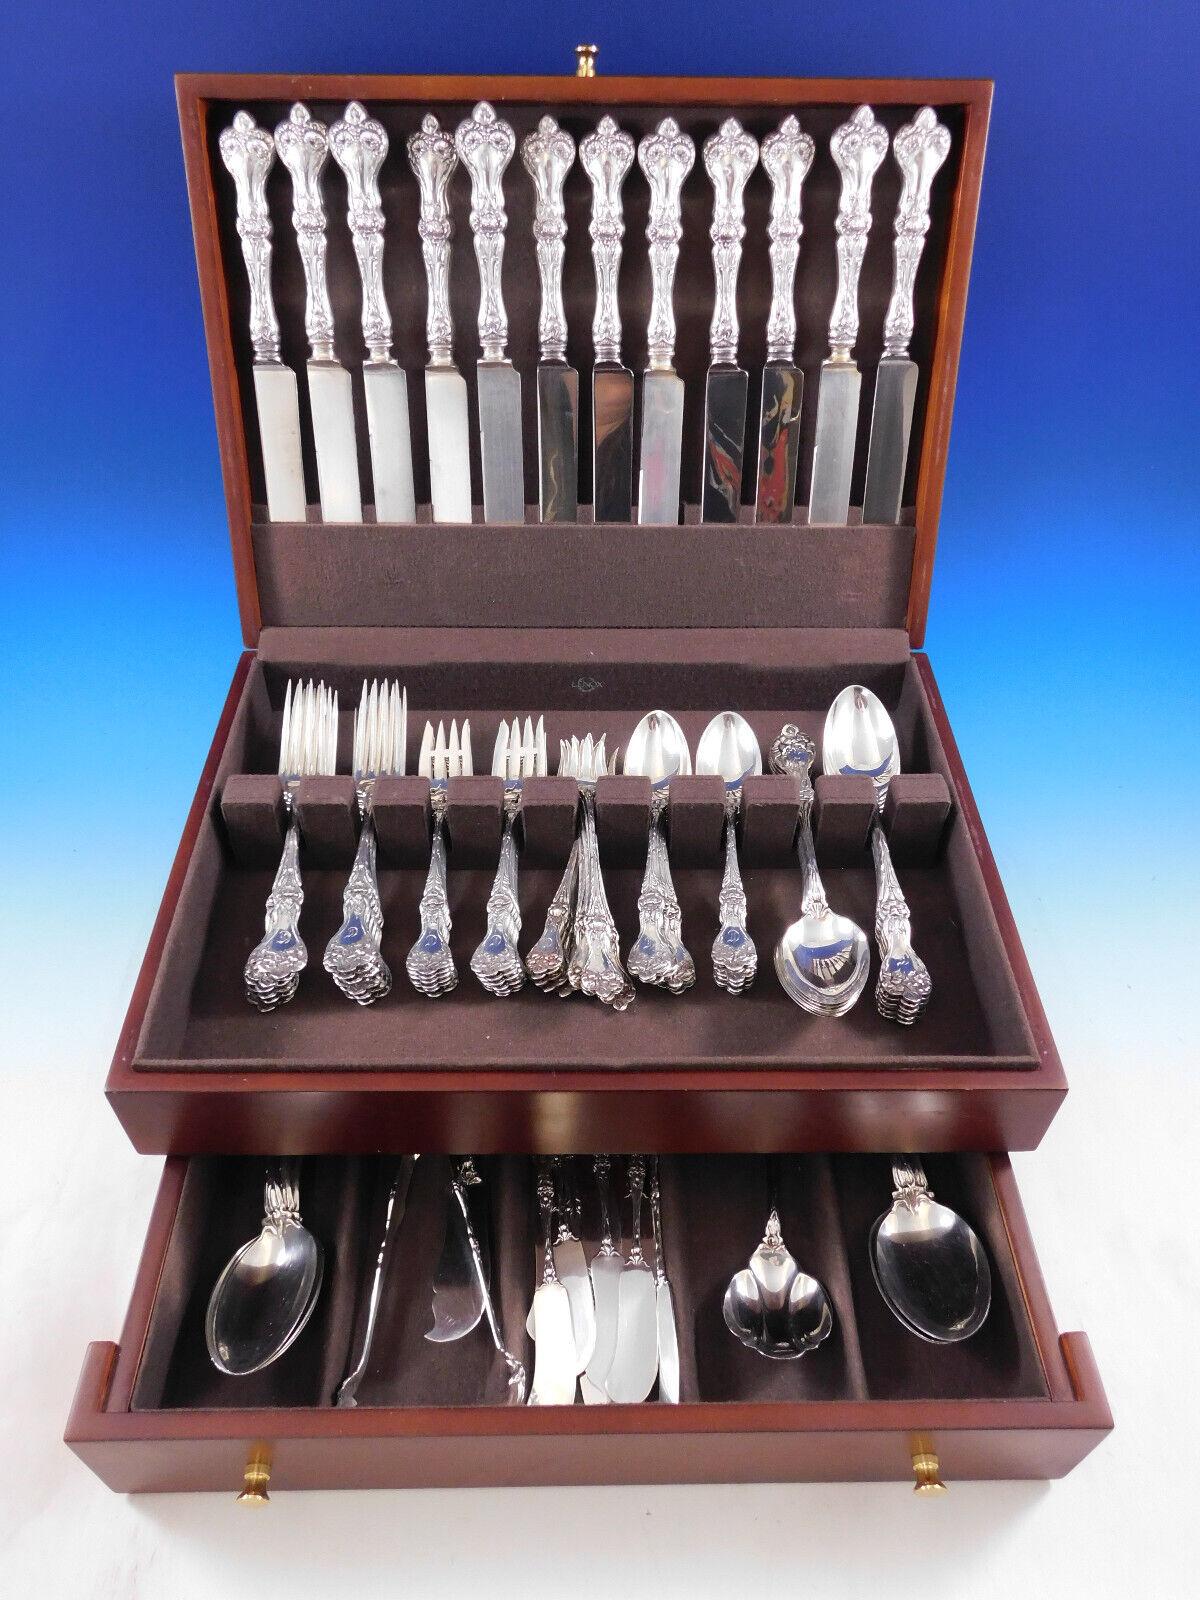 Rare multi-motif floral Majestic by Alvin circa 1900 sterling Silver flatware set - 93 pieces. This set includes:

12 Dinner Size Knives, 9 7/8